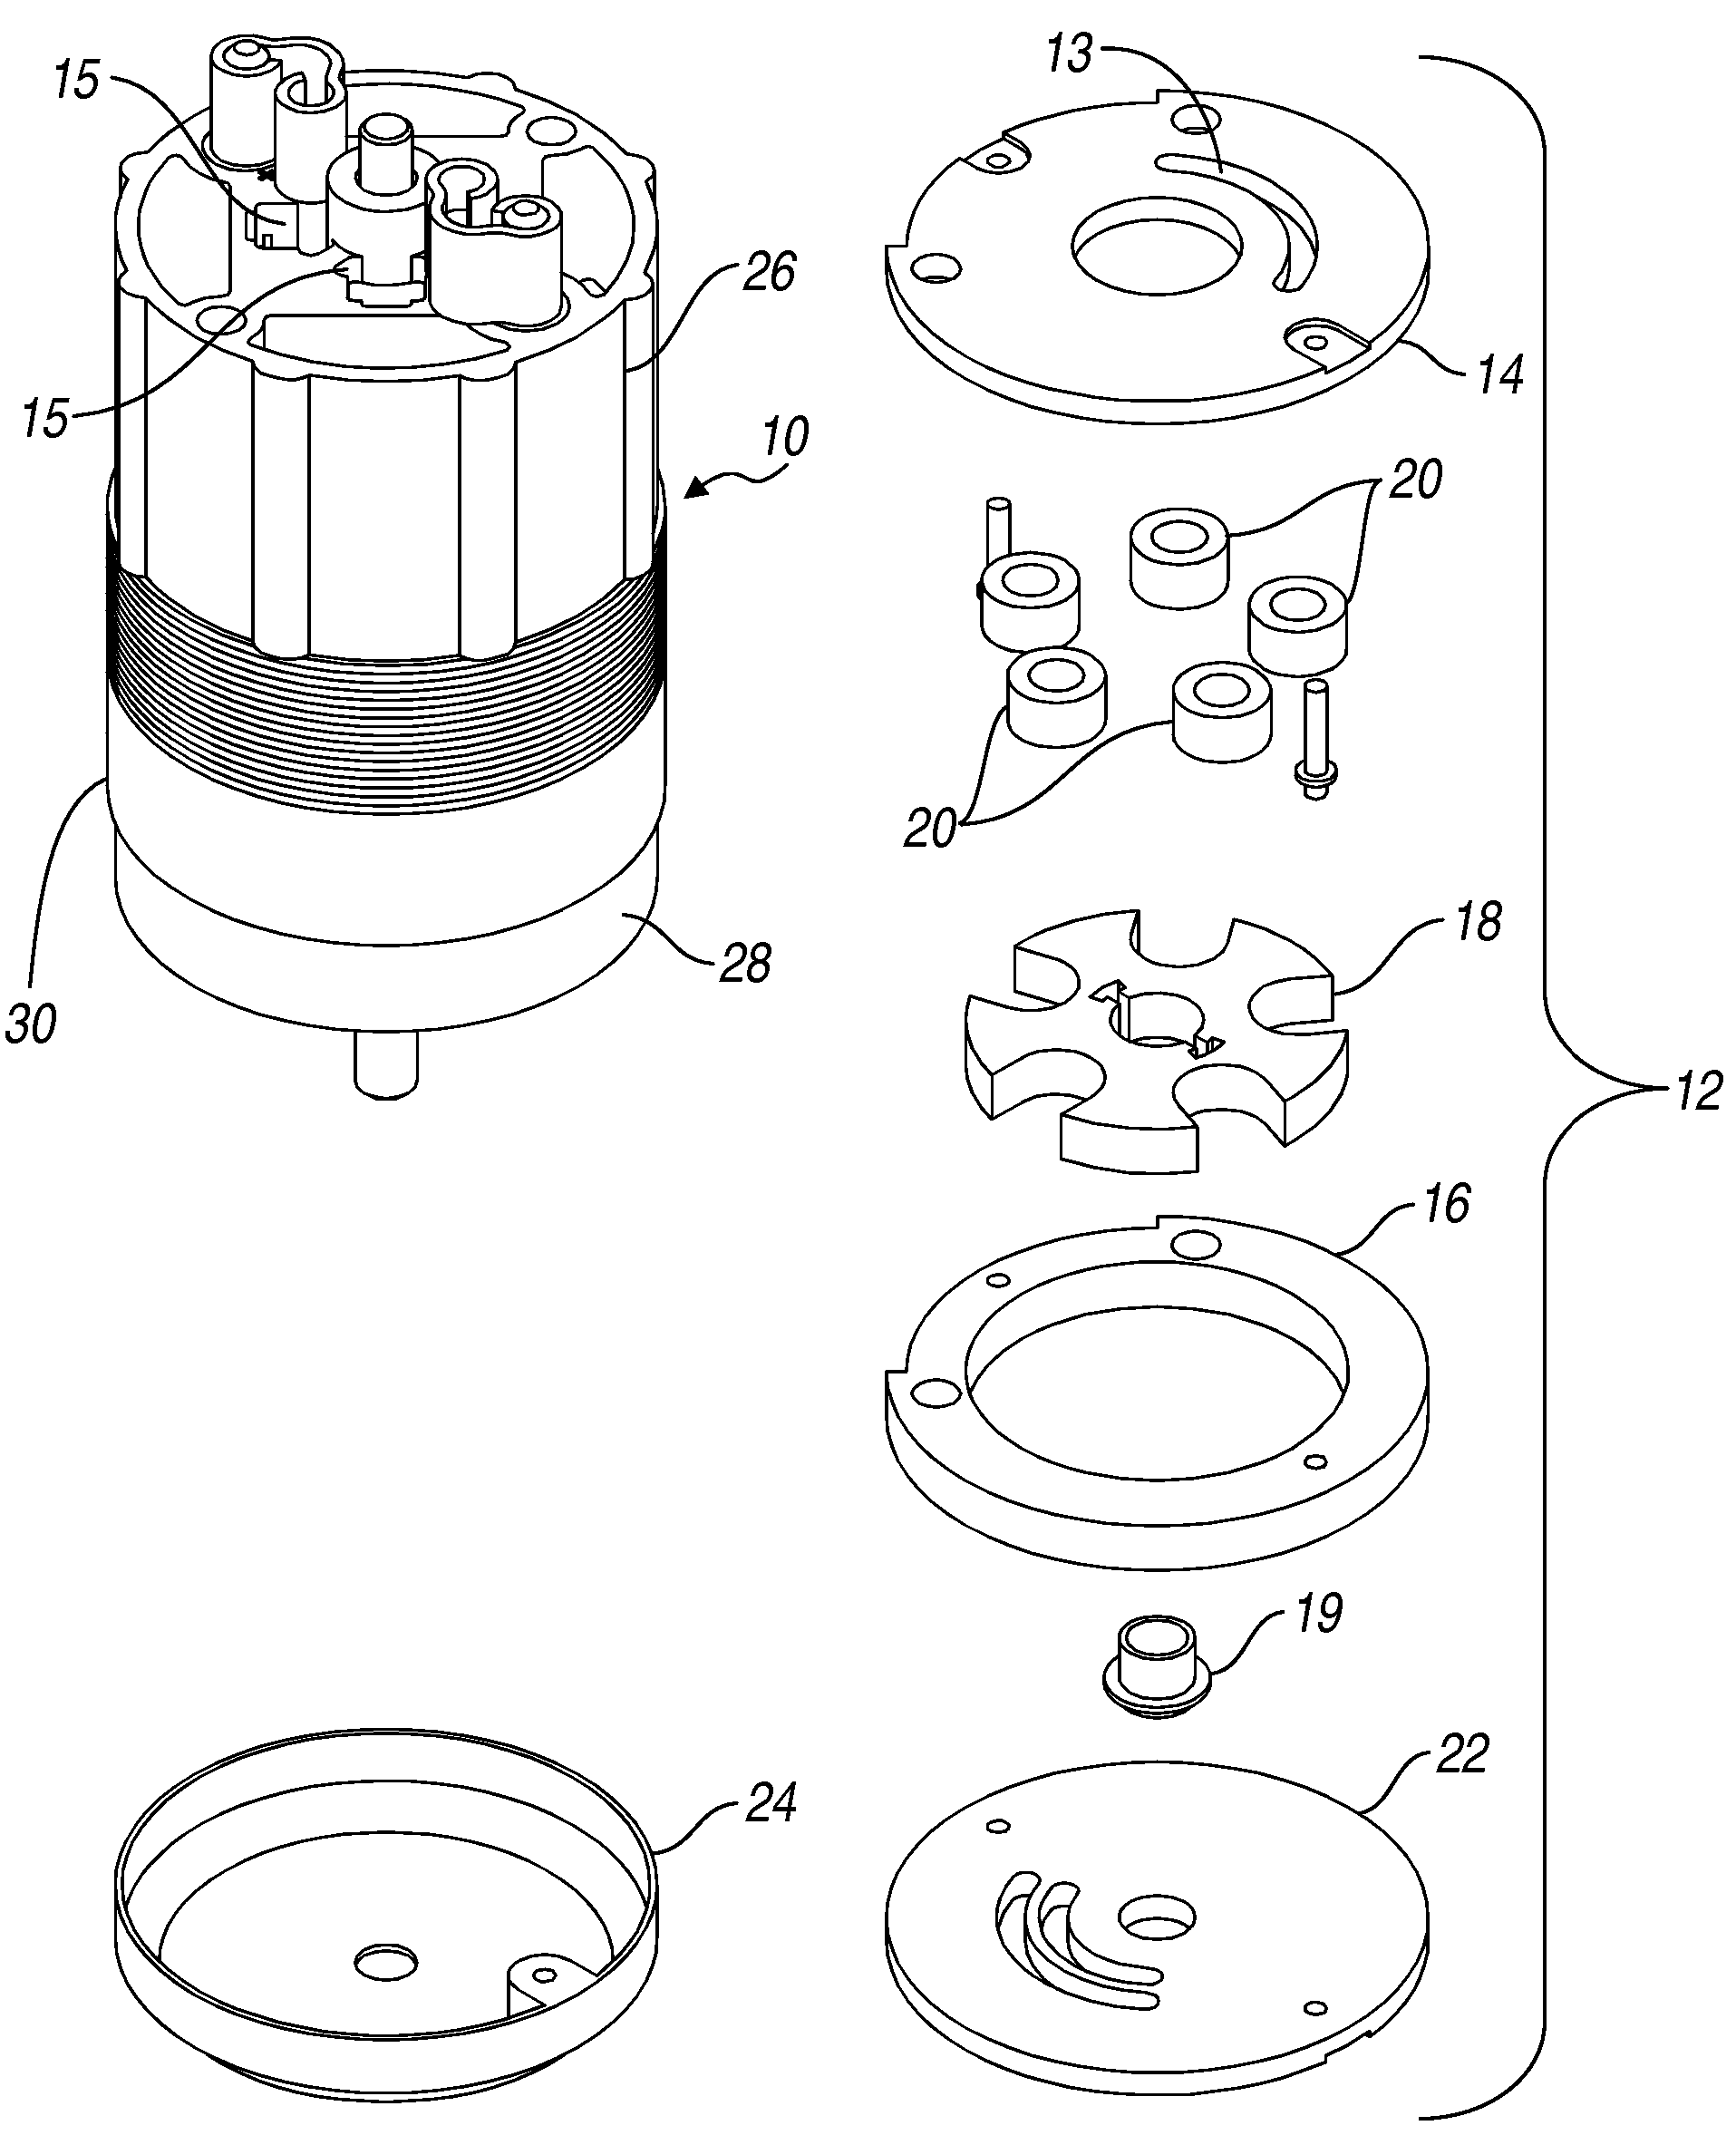 BLDC motor and pump assembly with encapsulated circuit board